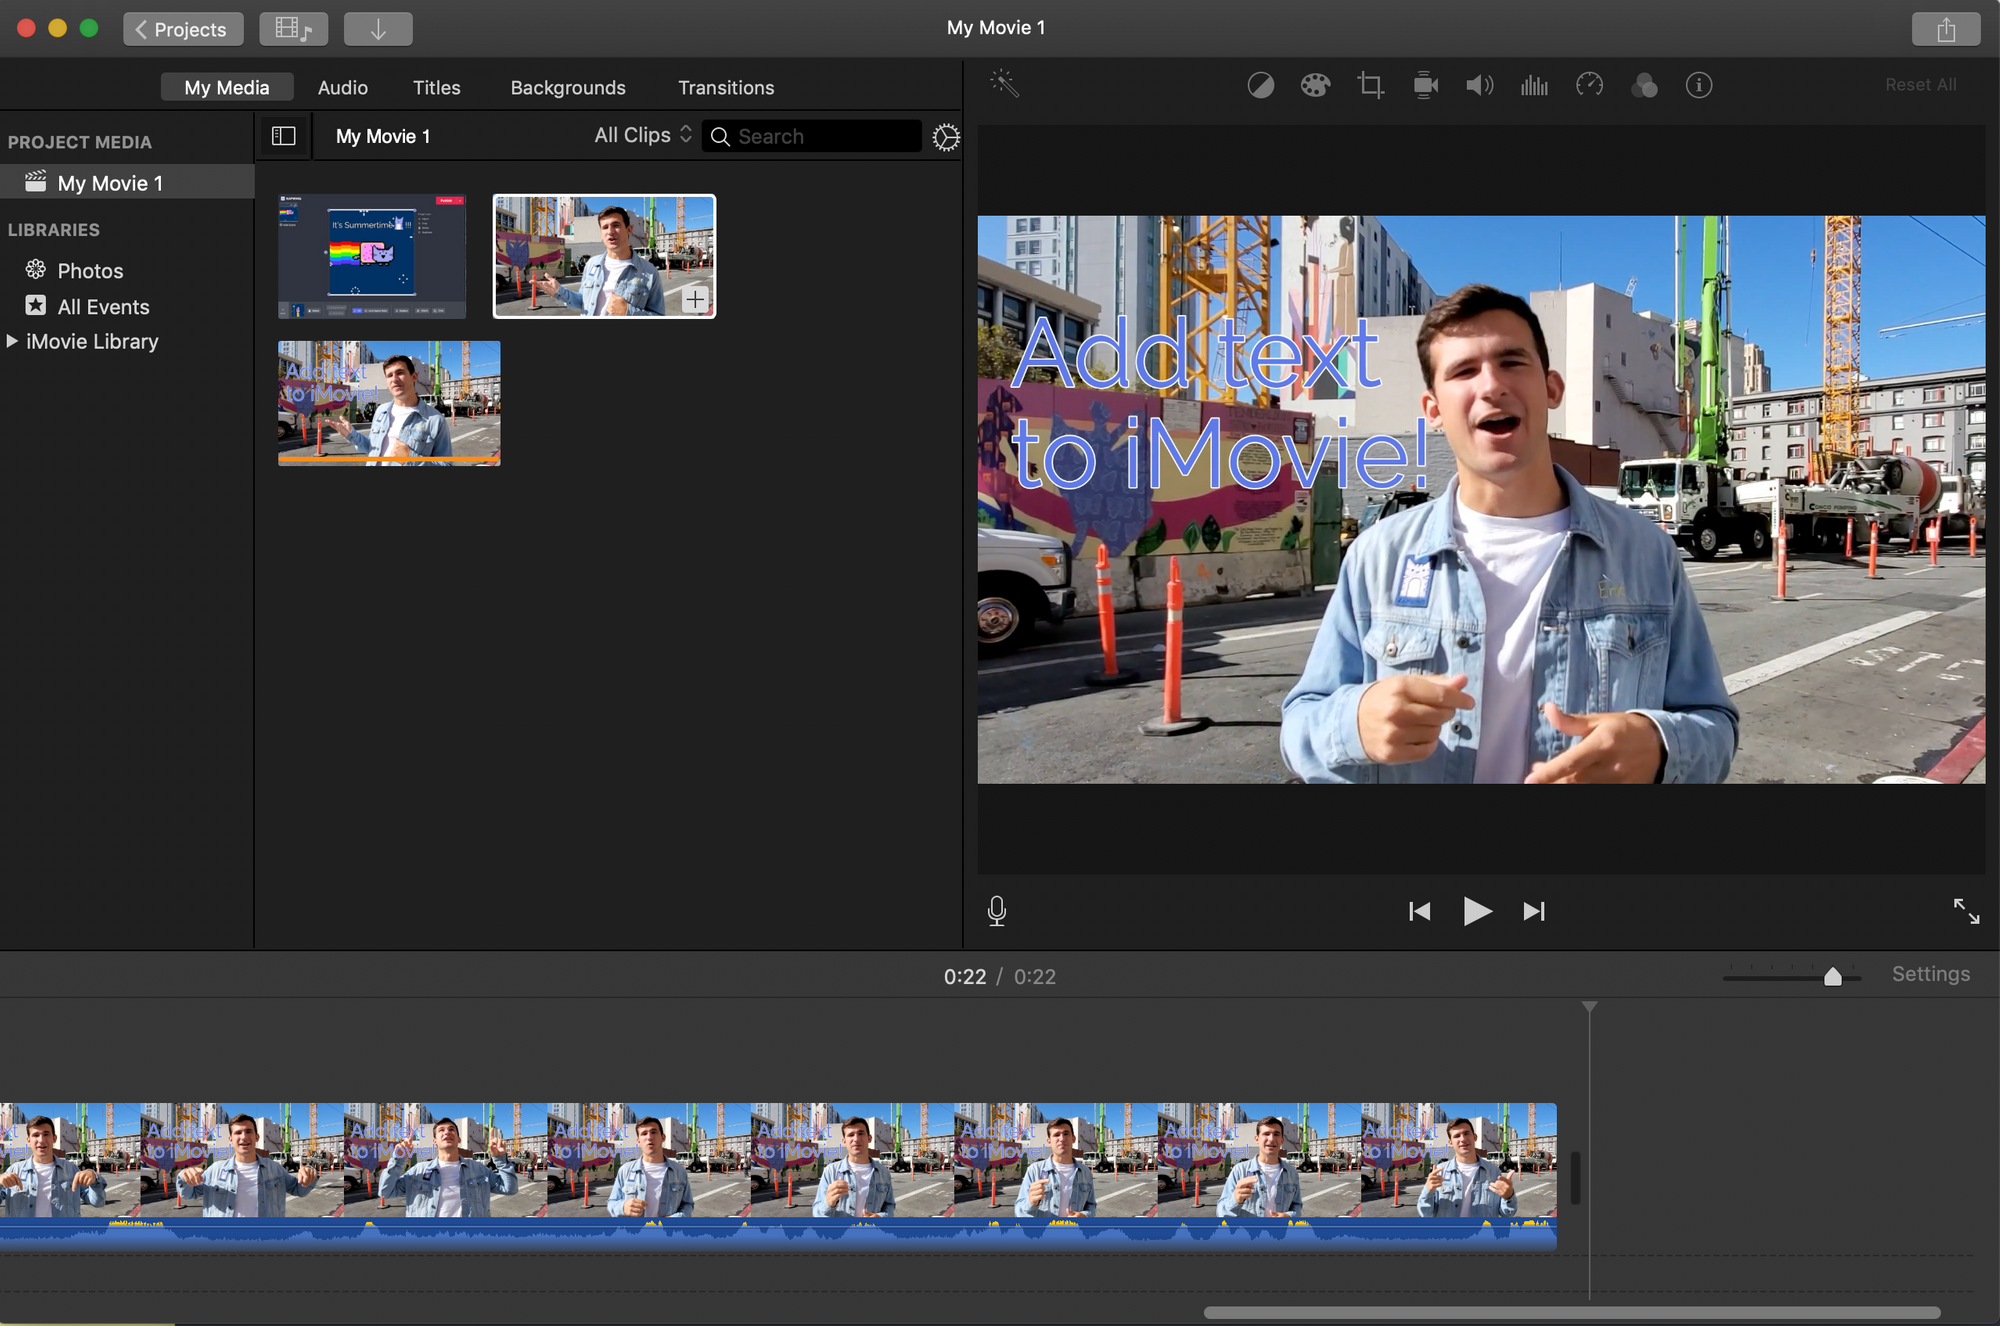 how to use imovie for youtube videos